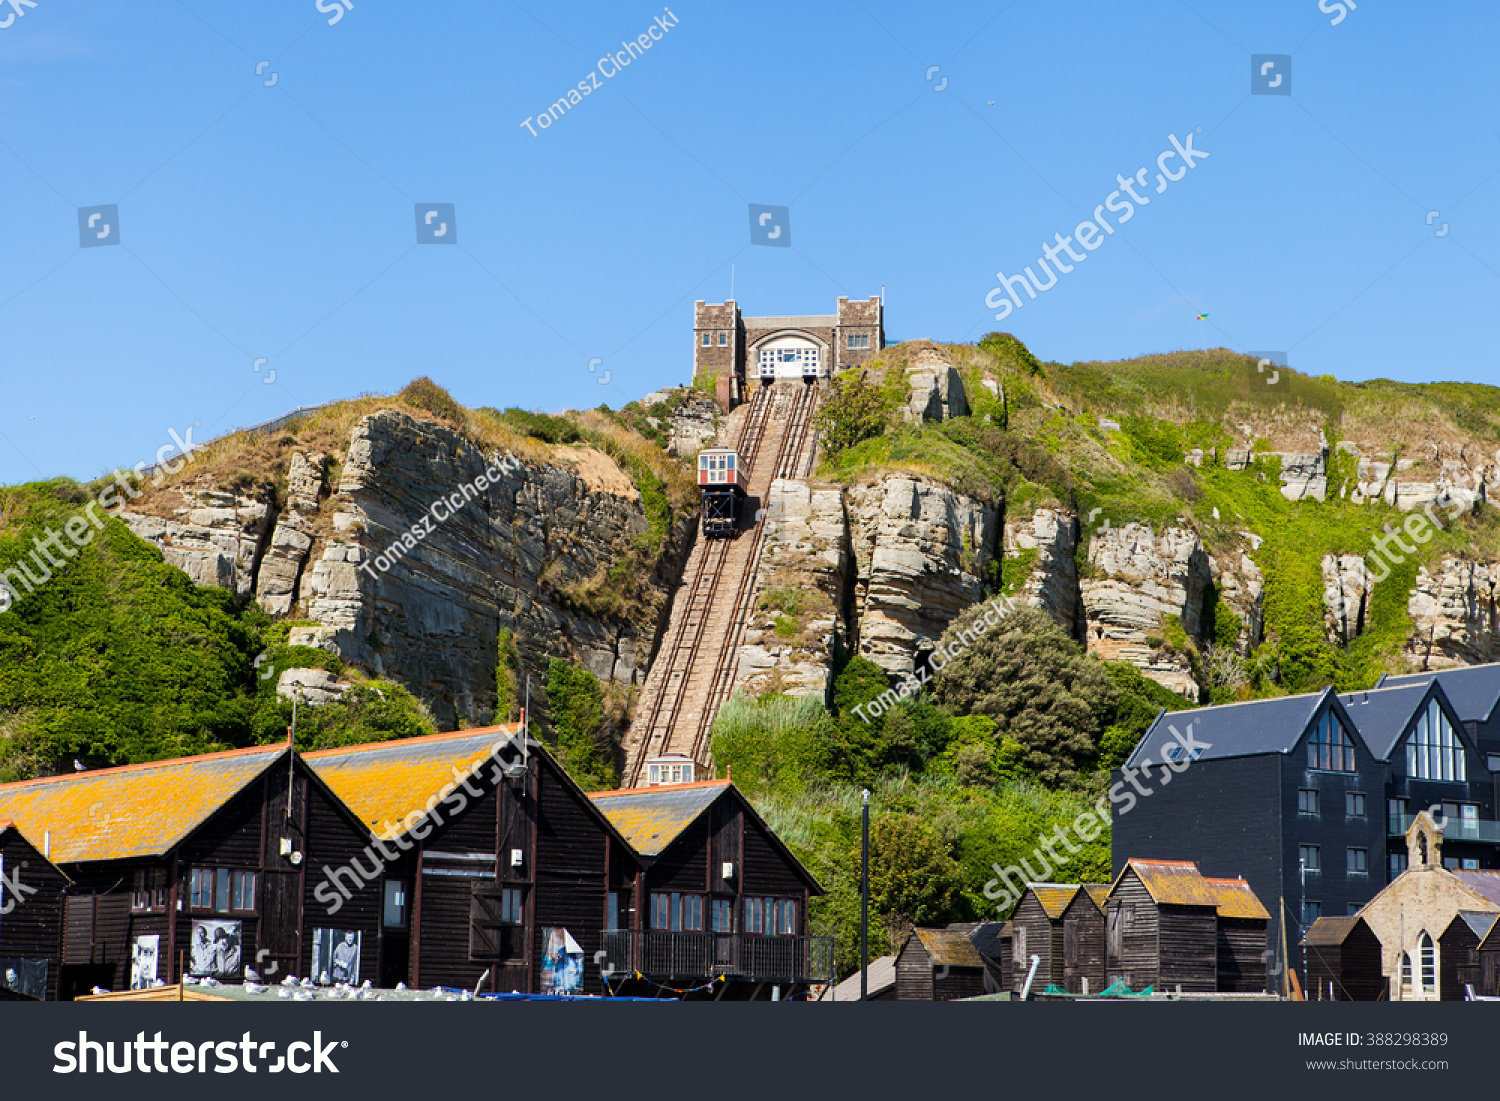 Port in Hastings, city in England #388298389